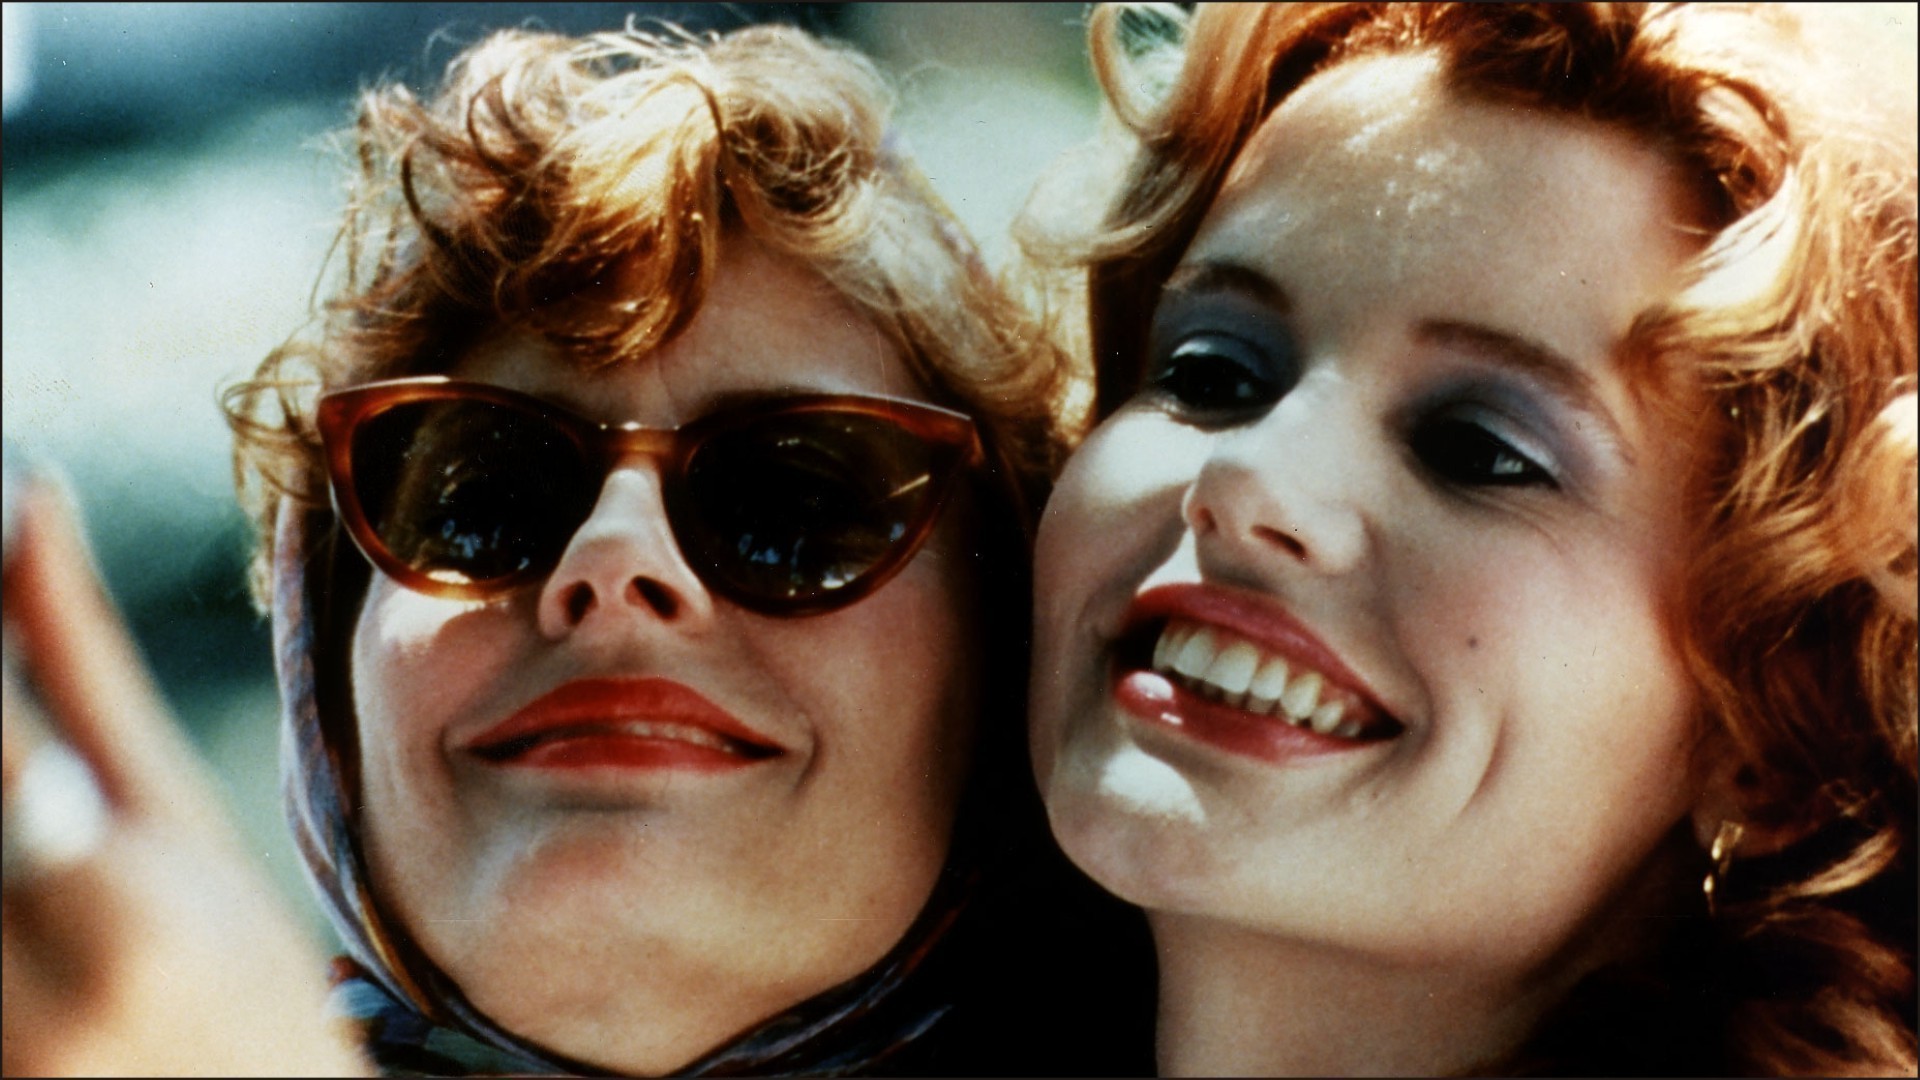 Thelma & Louise': The '90s Classic of Female Rage That Still Has the Power  to Shock